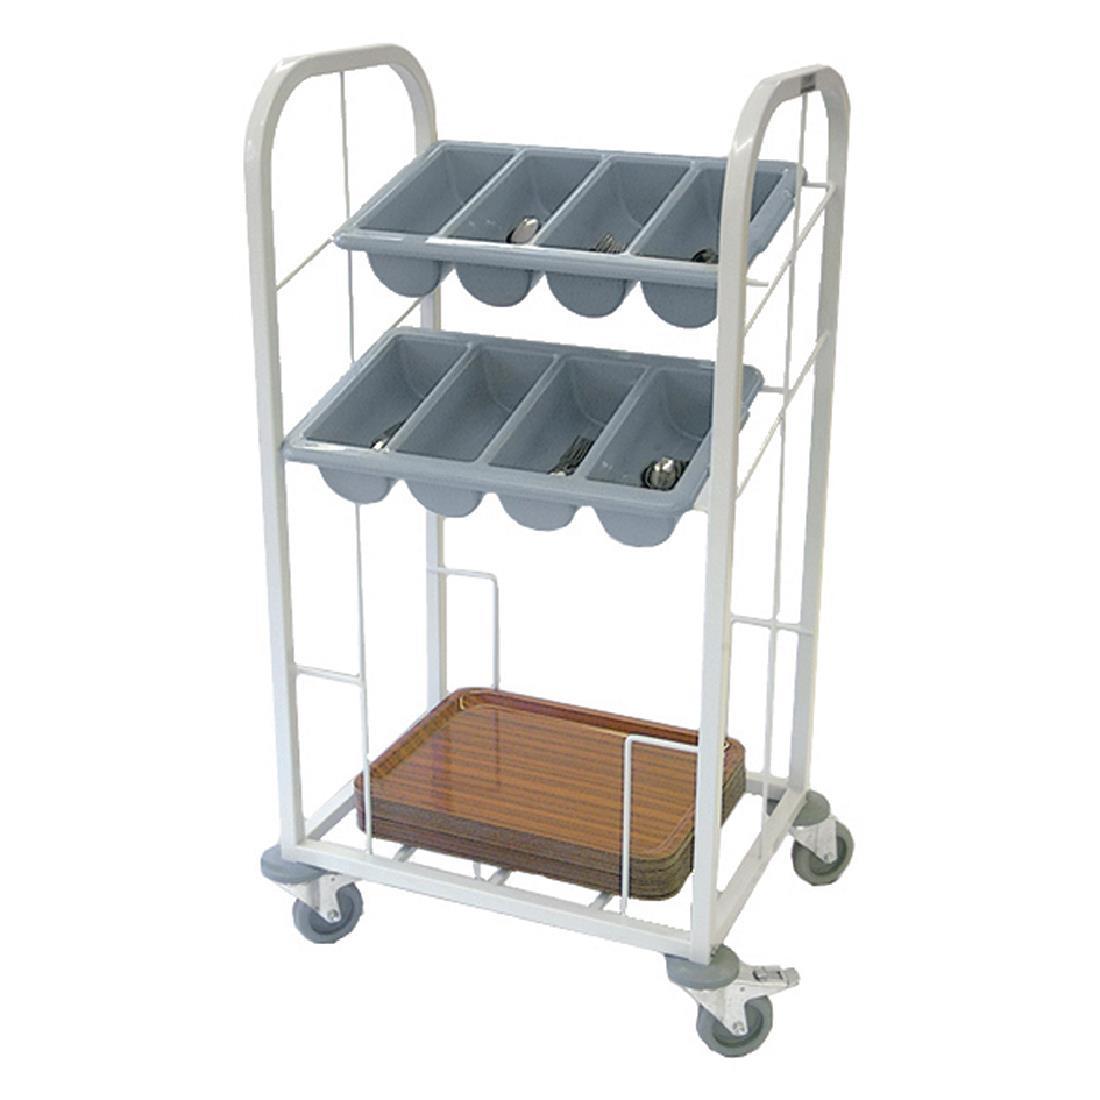 Craven Steel Two Tier Cutlery and Tray Dispense Trolley - GG139  - 1